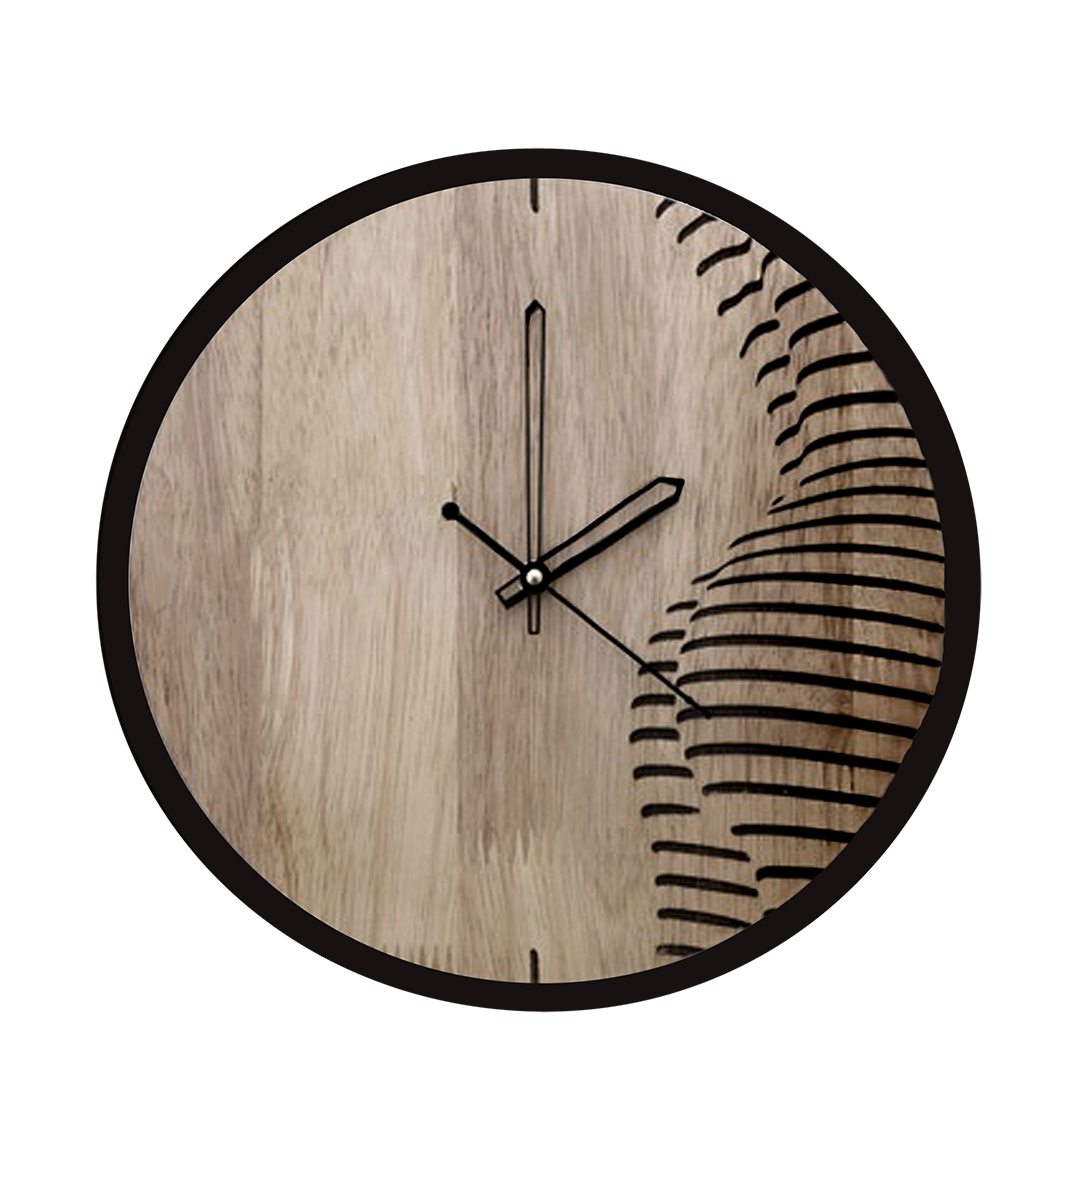 wall clock, wall clock png, wall clock PNG image, wall clock png transparent image, wall clock png full hd images